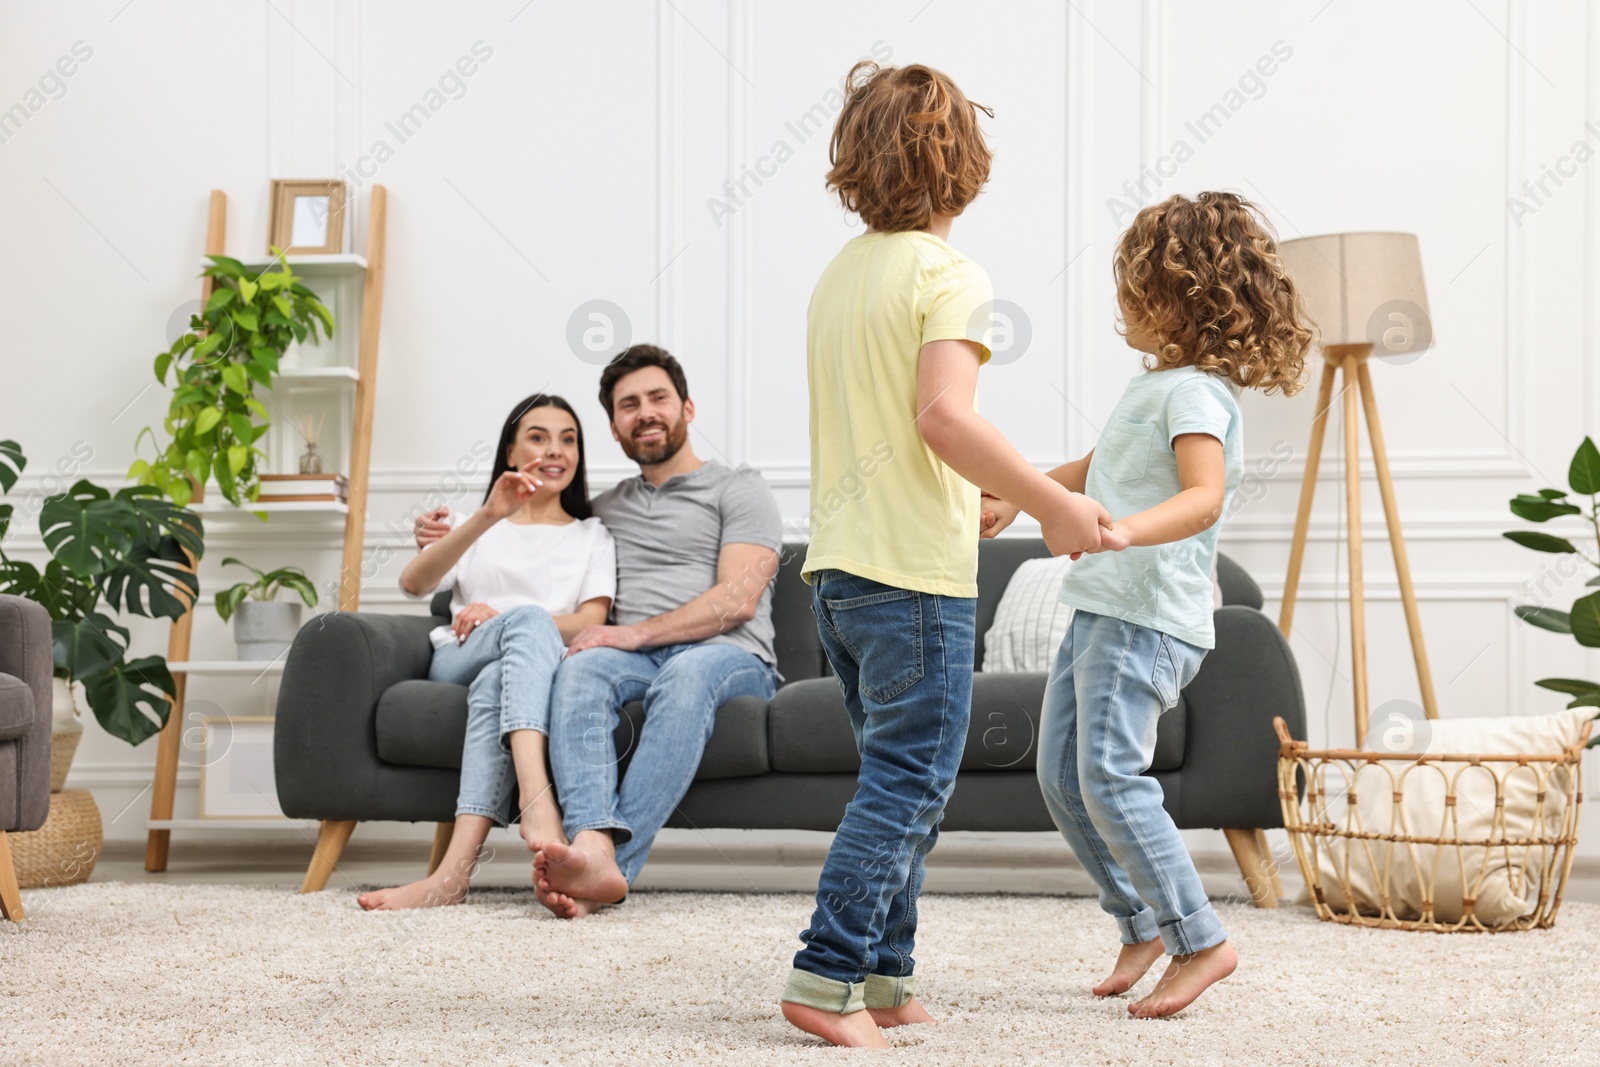 Photo of Children dancing while their parents looking at them in room